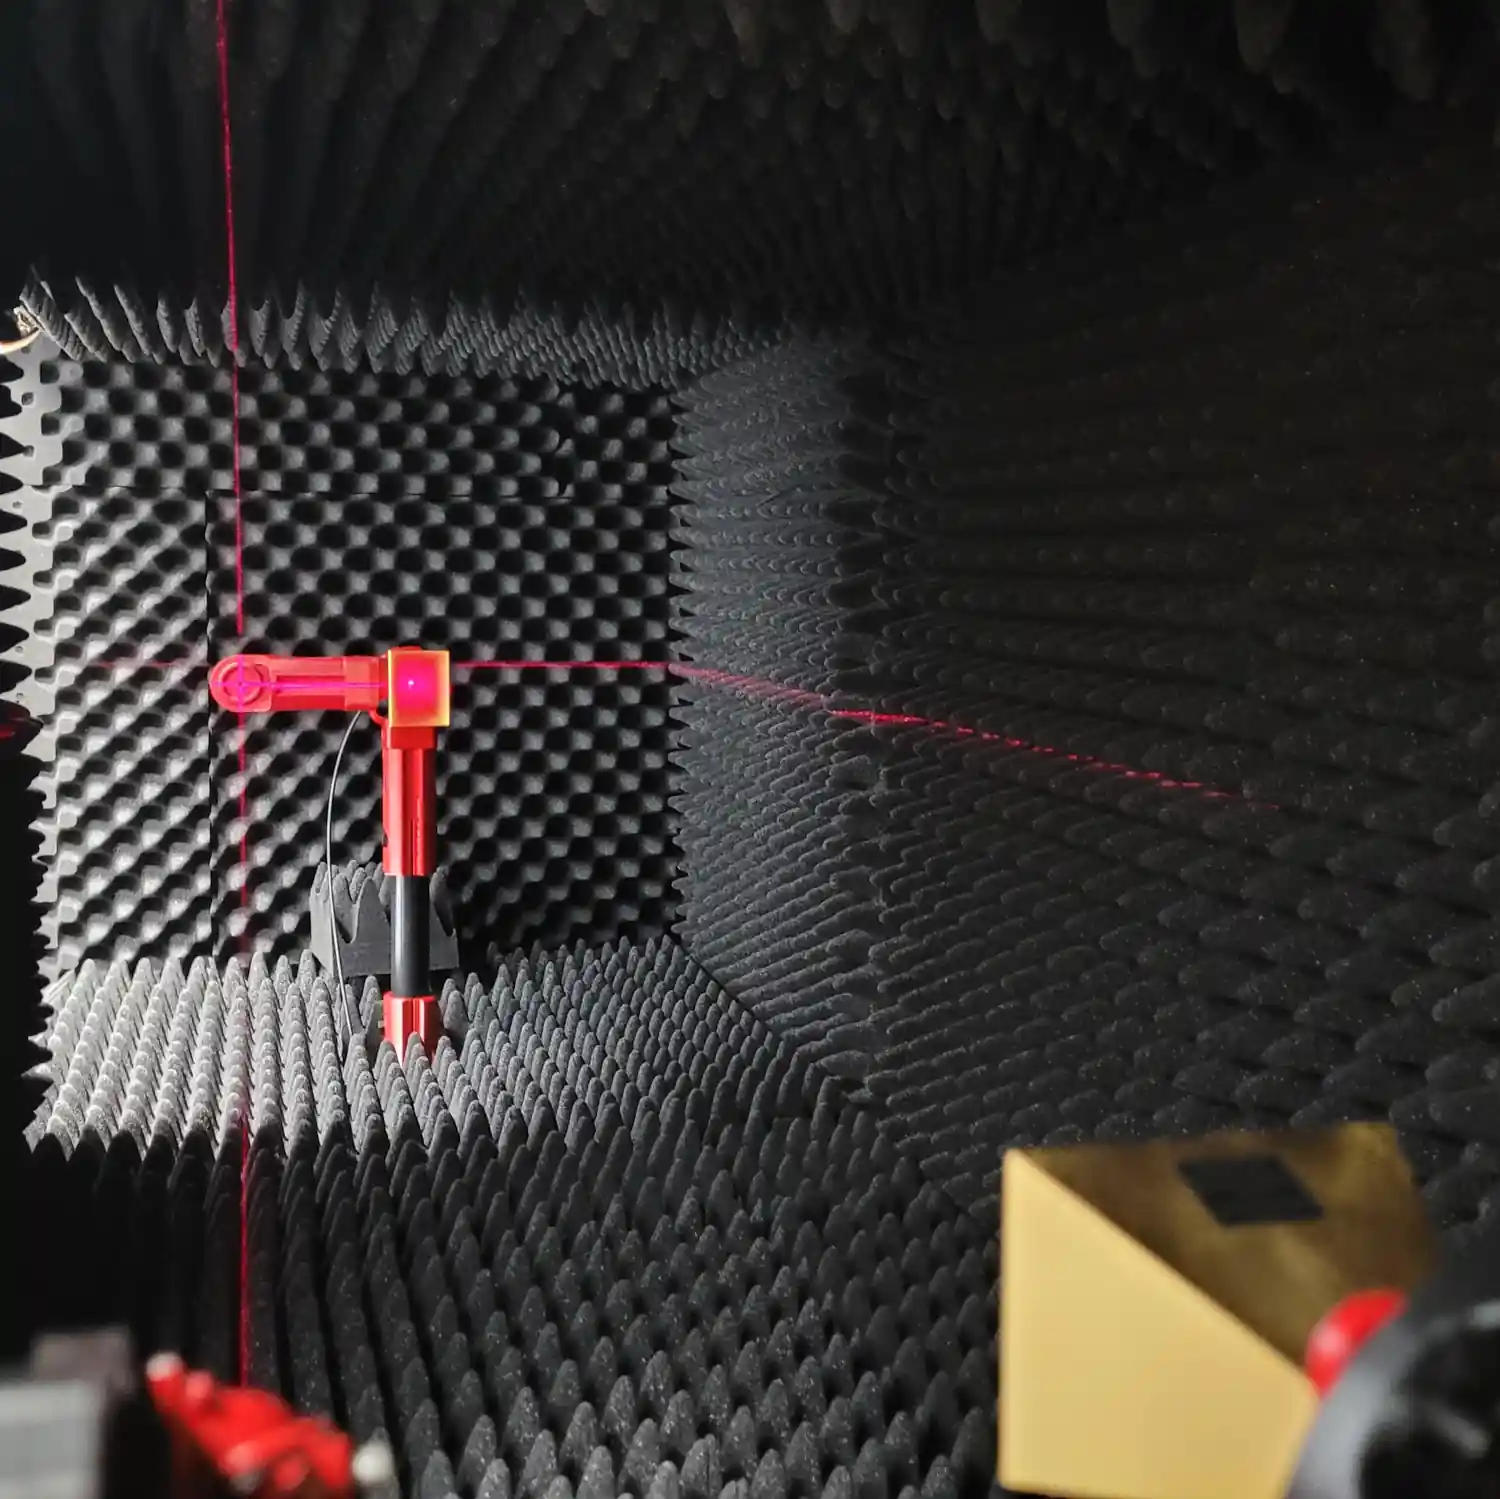 millimeter wave chamber for measuring extremely high frequency devices